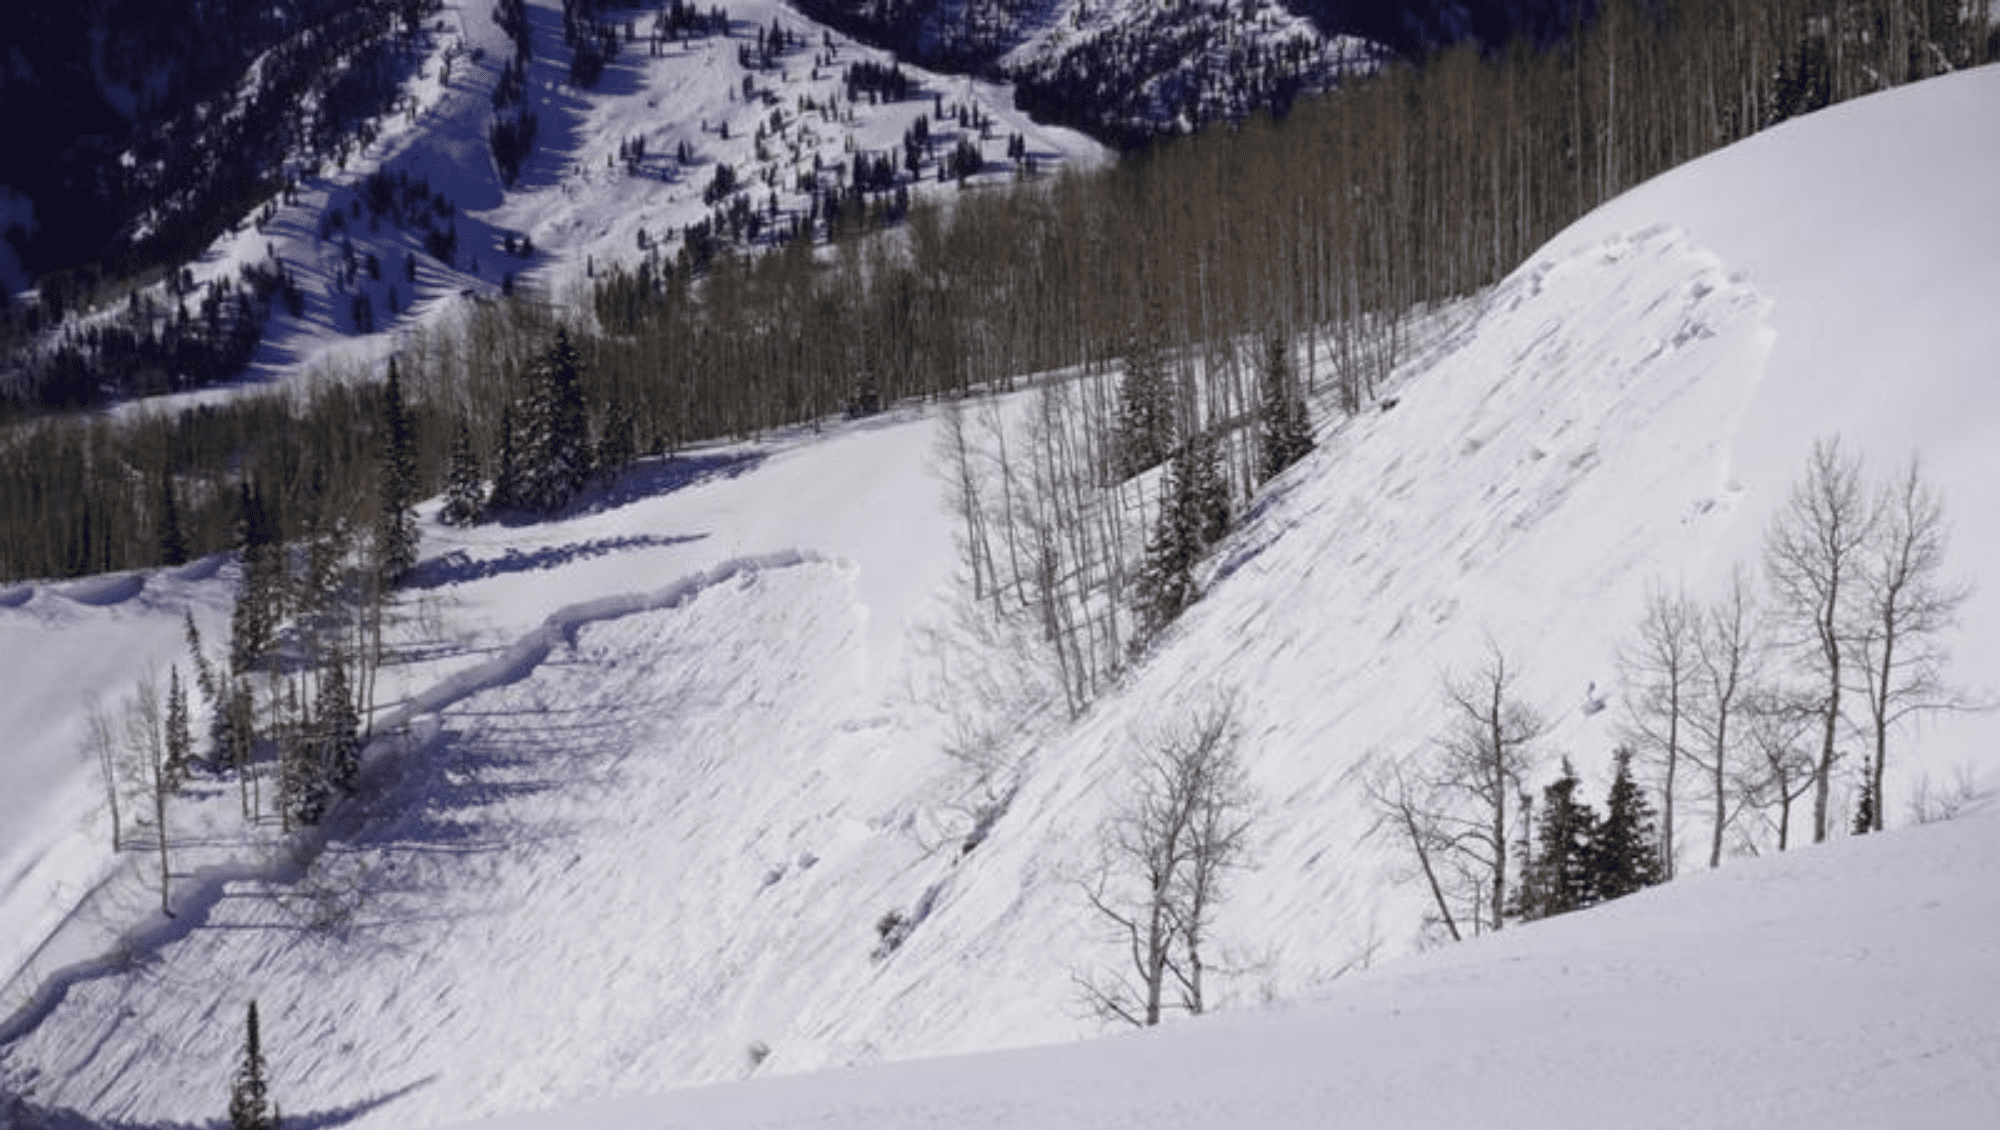 WARNING Utah Avalanche Center Issues Avalanche Watch for the